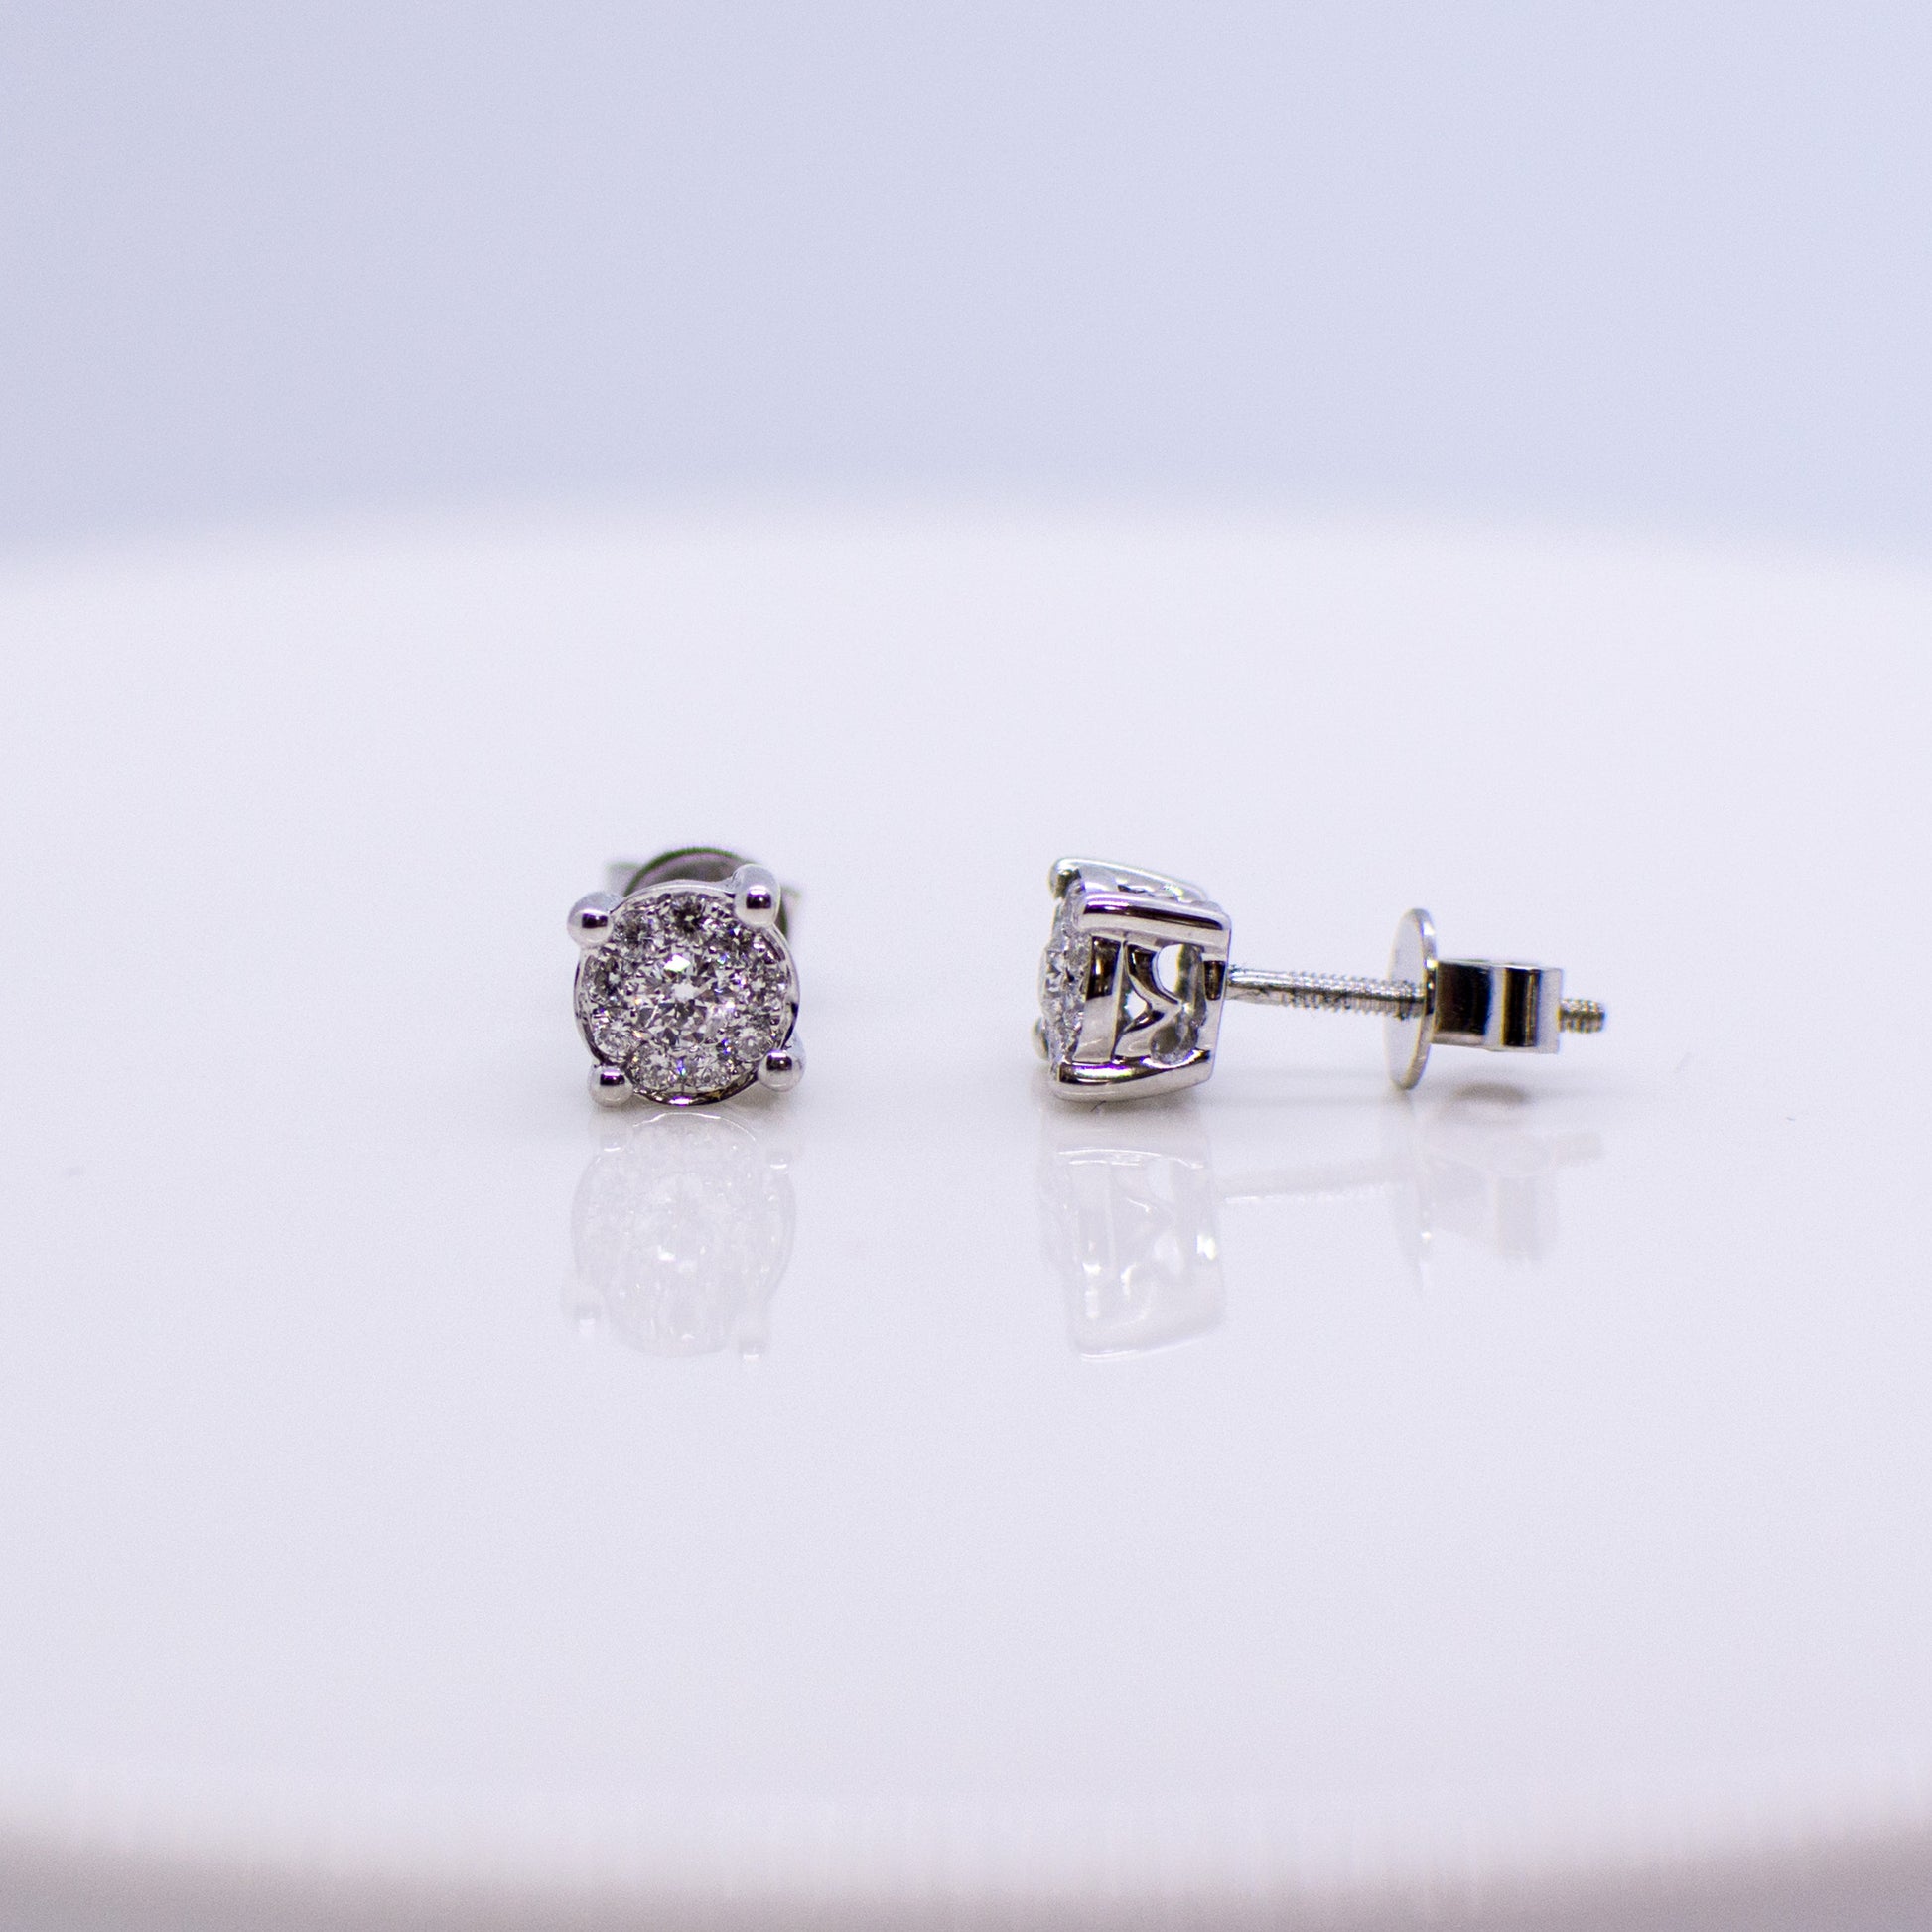 5.5mm wide 18ct white gold diamond stud earrings. 0.25ct of round brilliant cut diamonds.  Illusion setting.  18ct white gold.   Screw on butterfly backs.